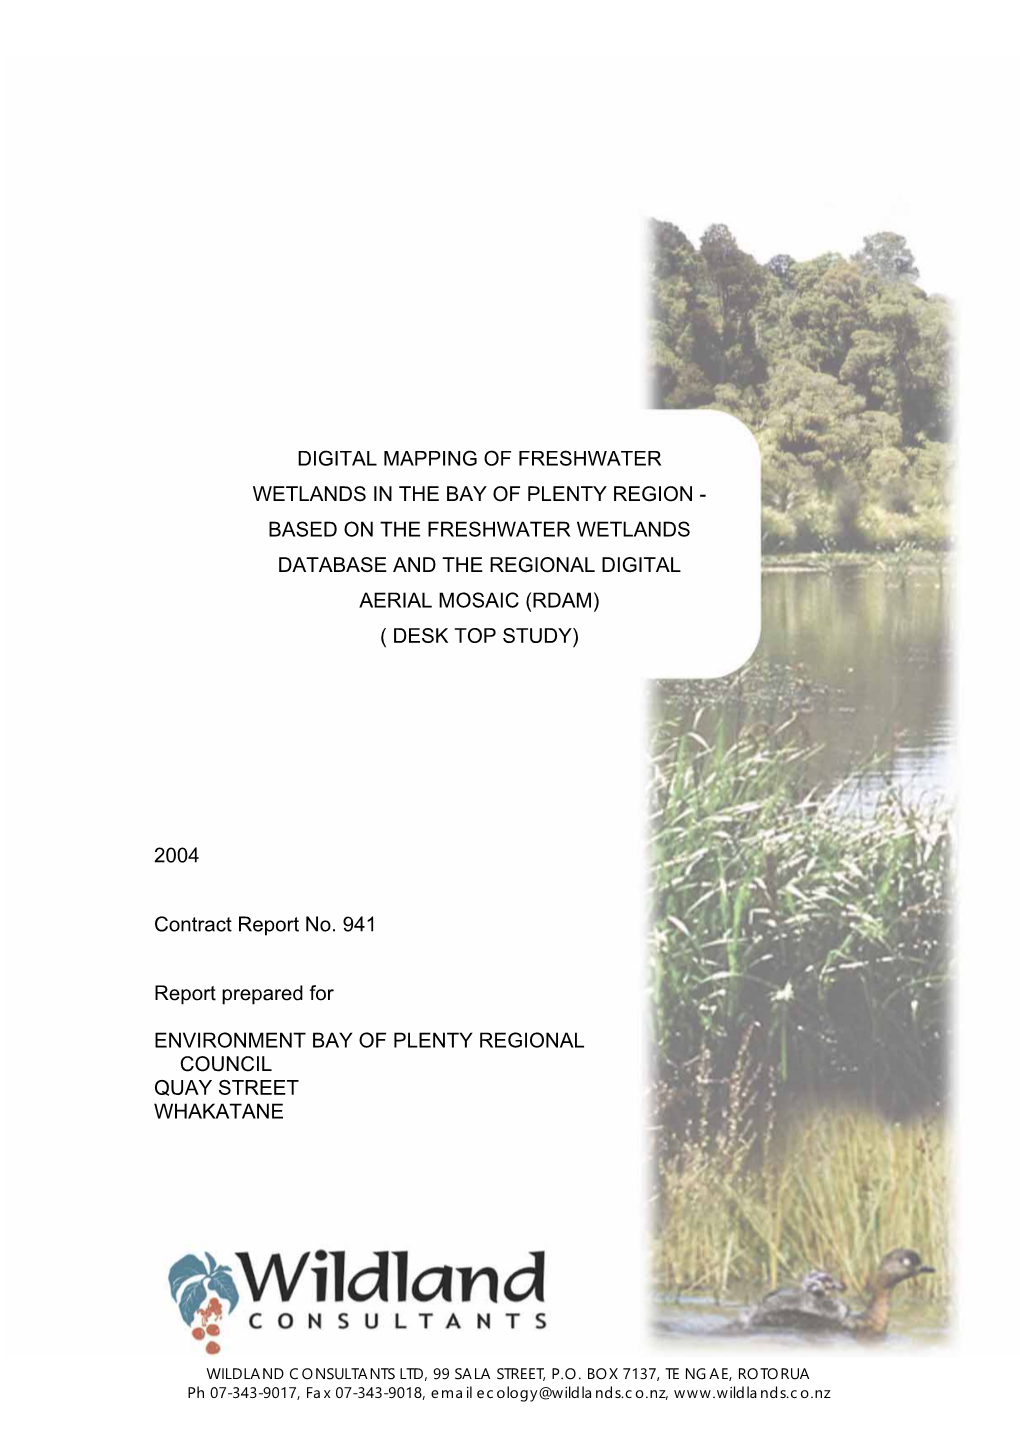 1 Digital Mapping of Freshwater Wetlands In